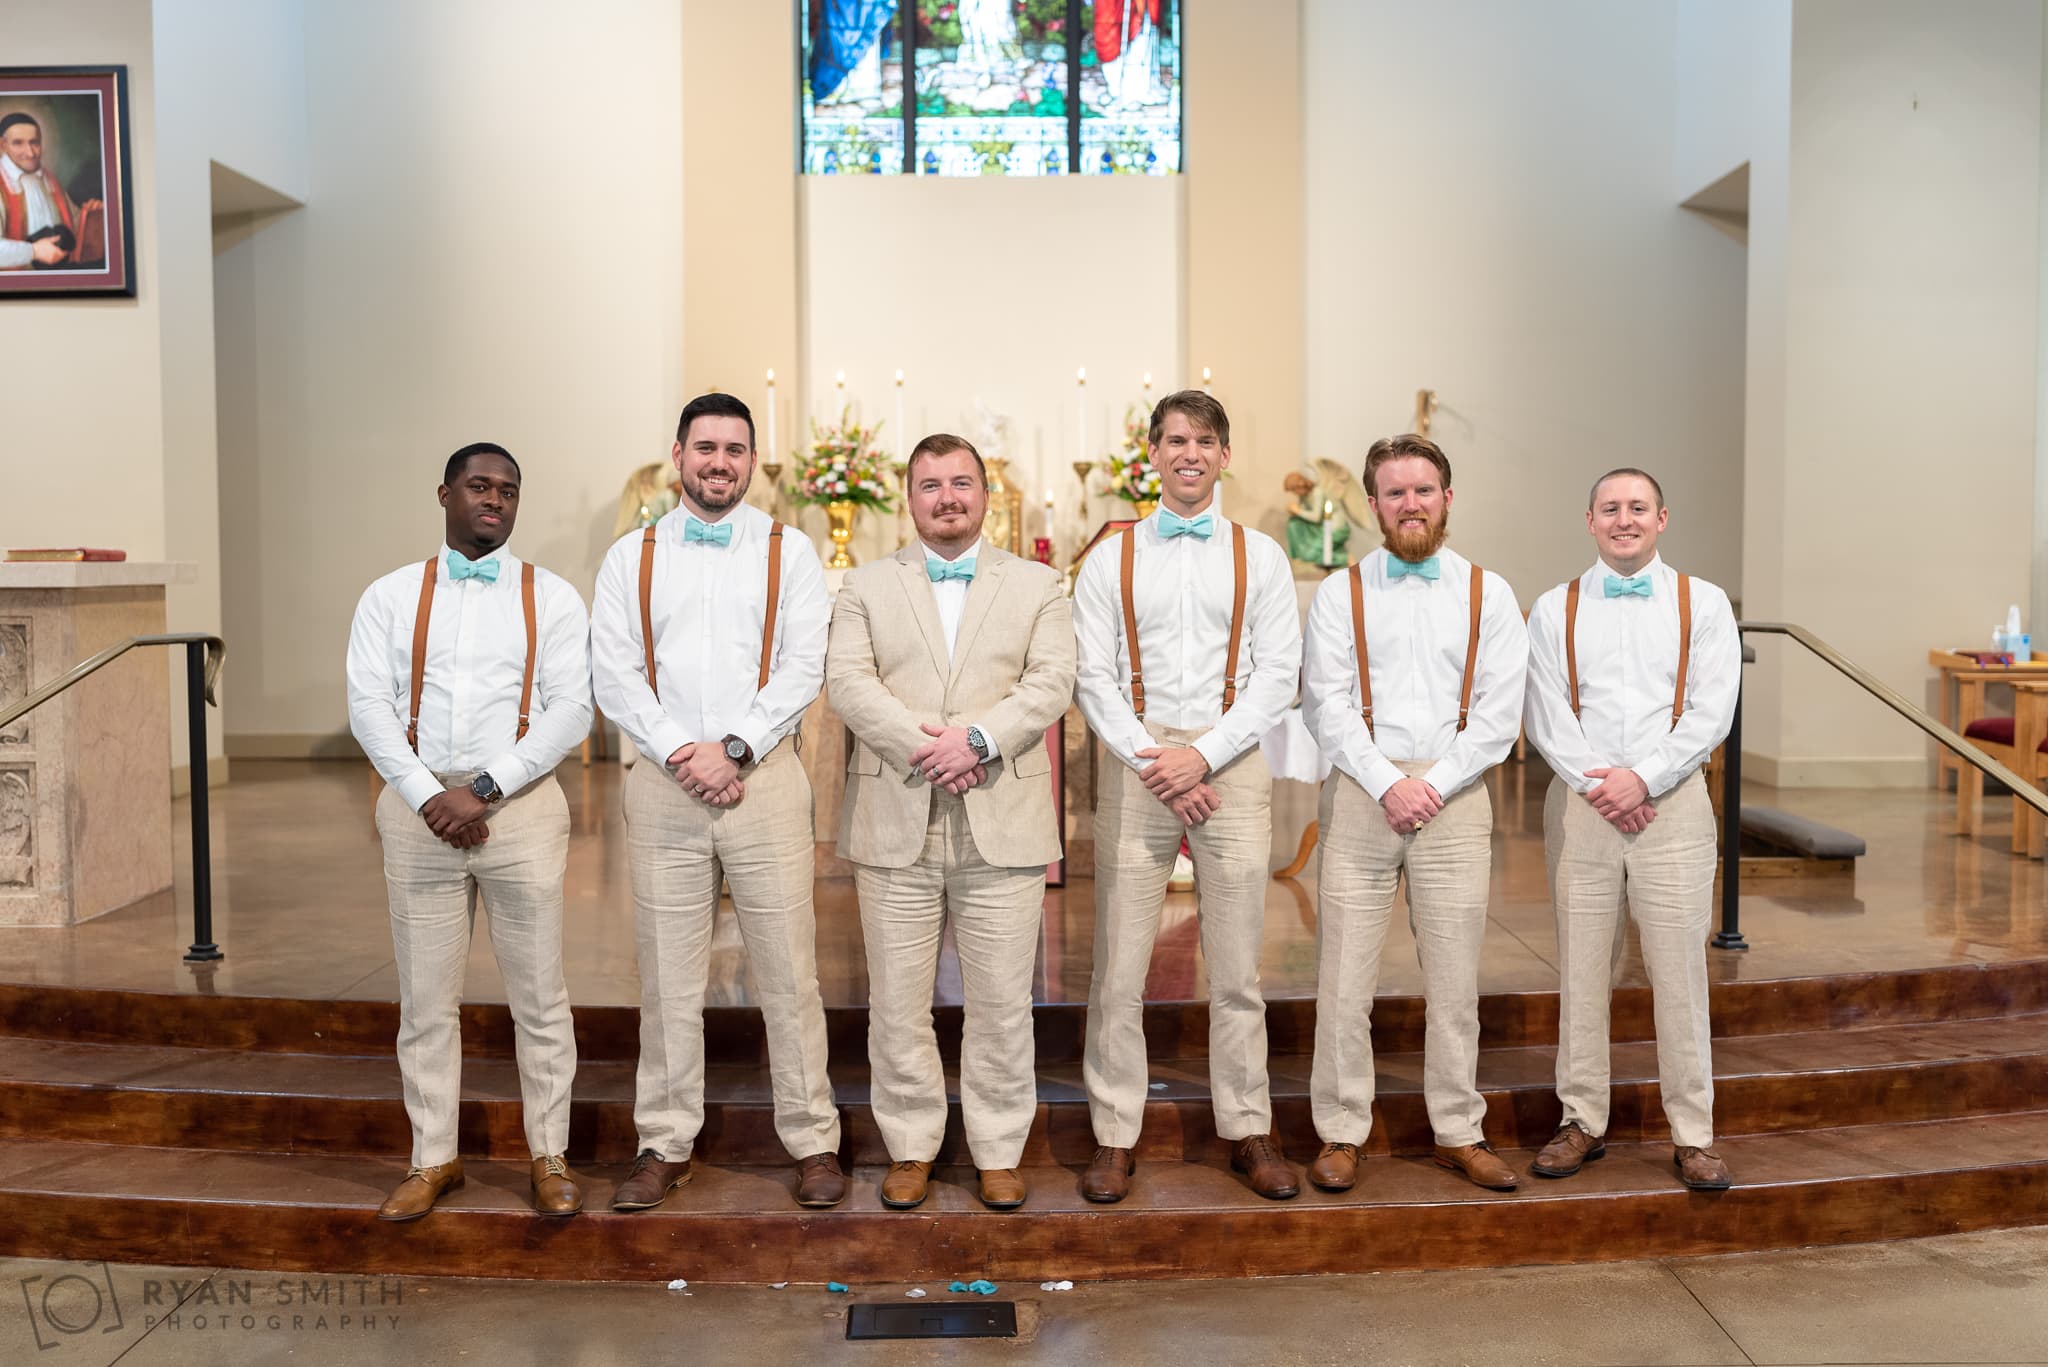 Groomsmen pictures after the ceremony - St. Michael's - Garden City, SC